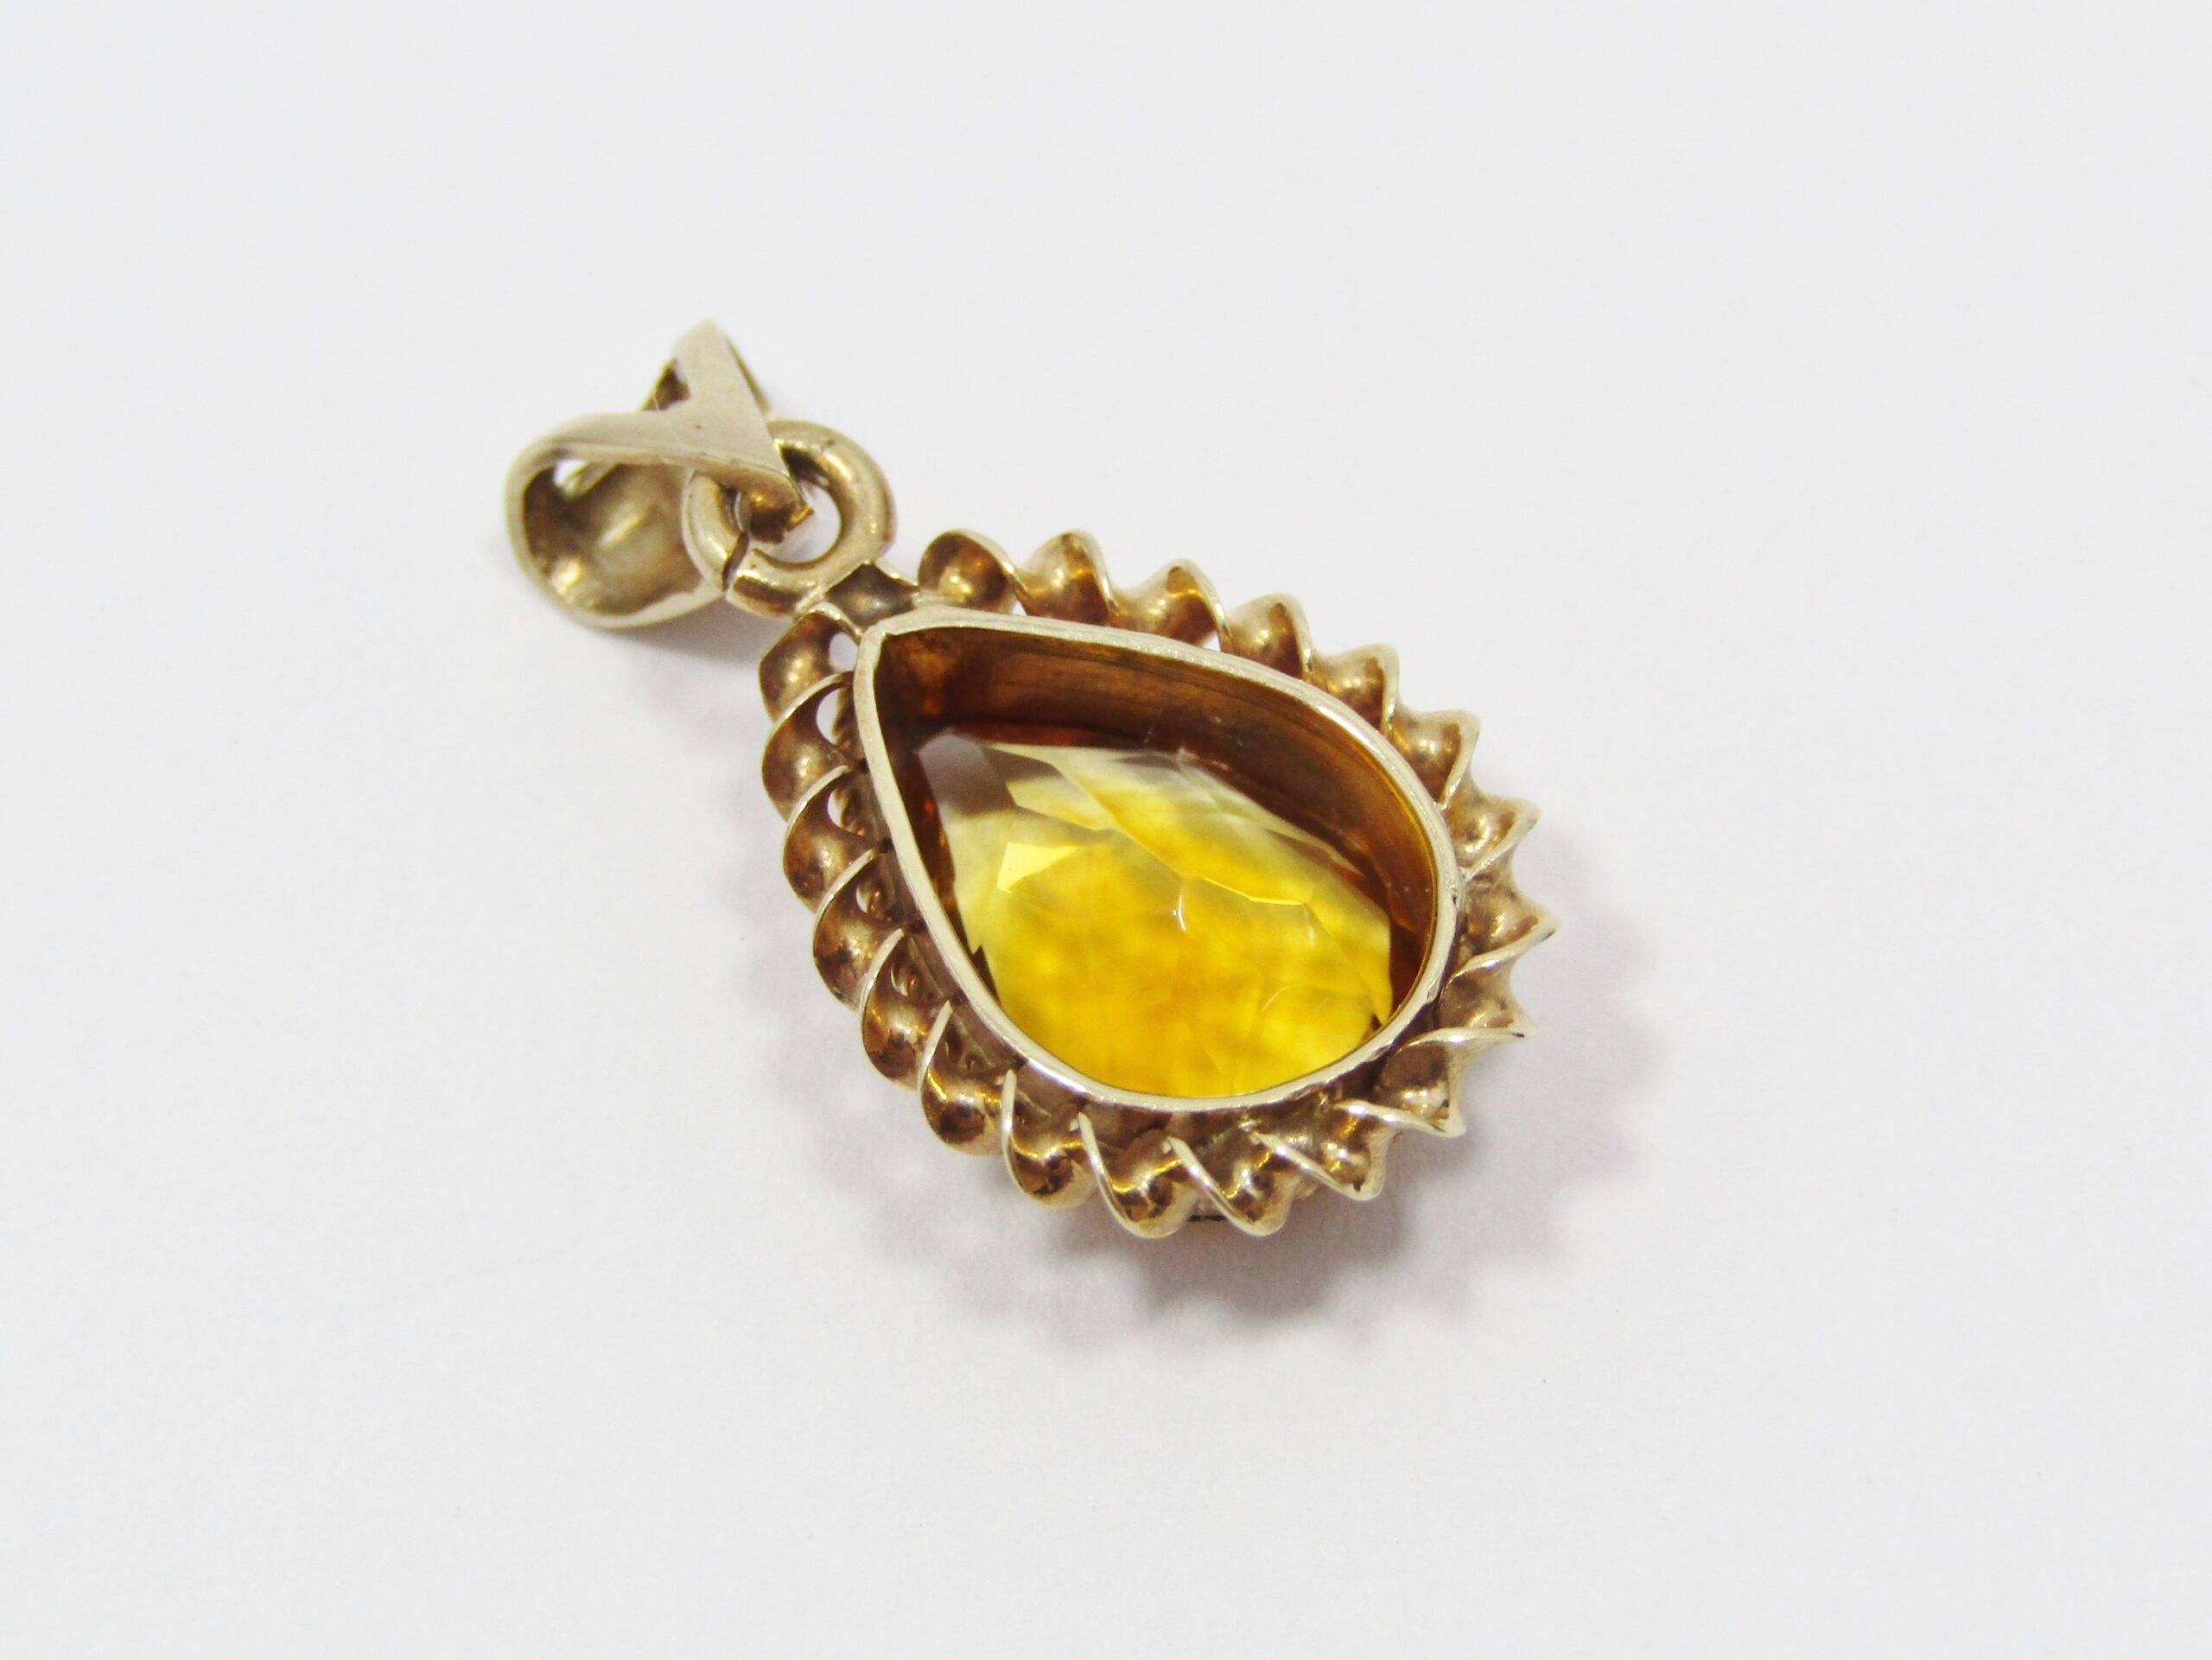 A Lovely Teardrop Design Pendant With a Citrine in 9ct Gold